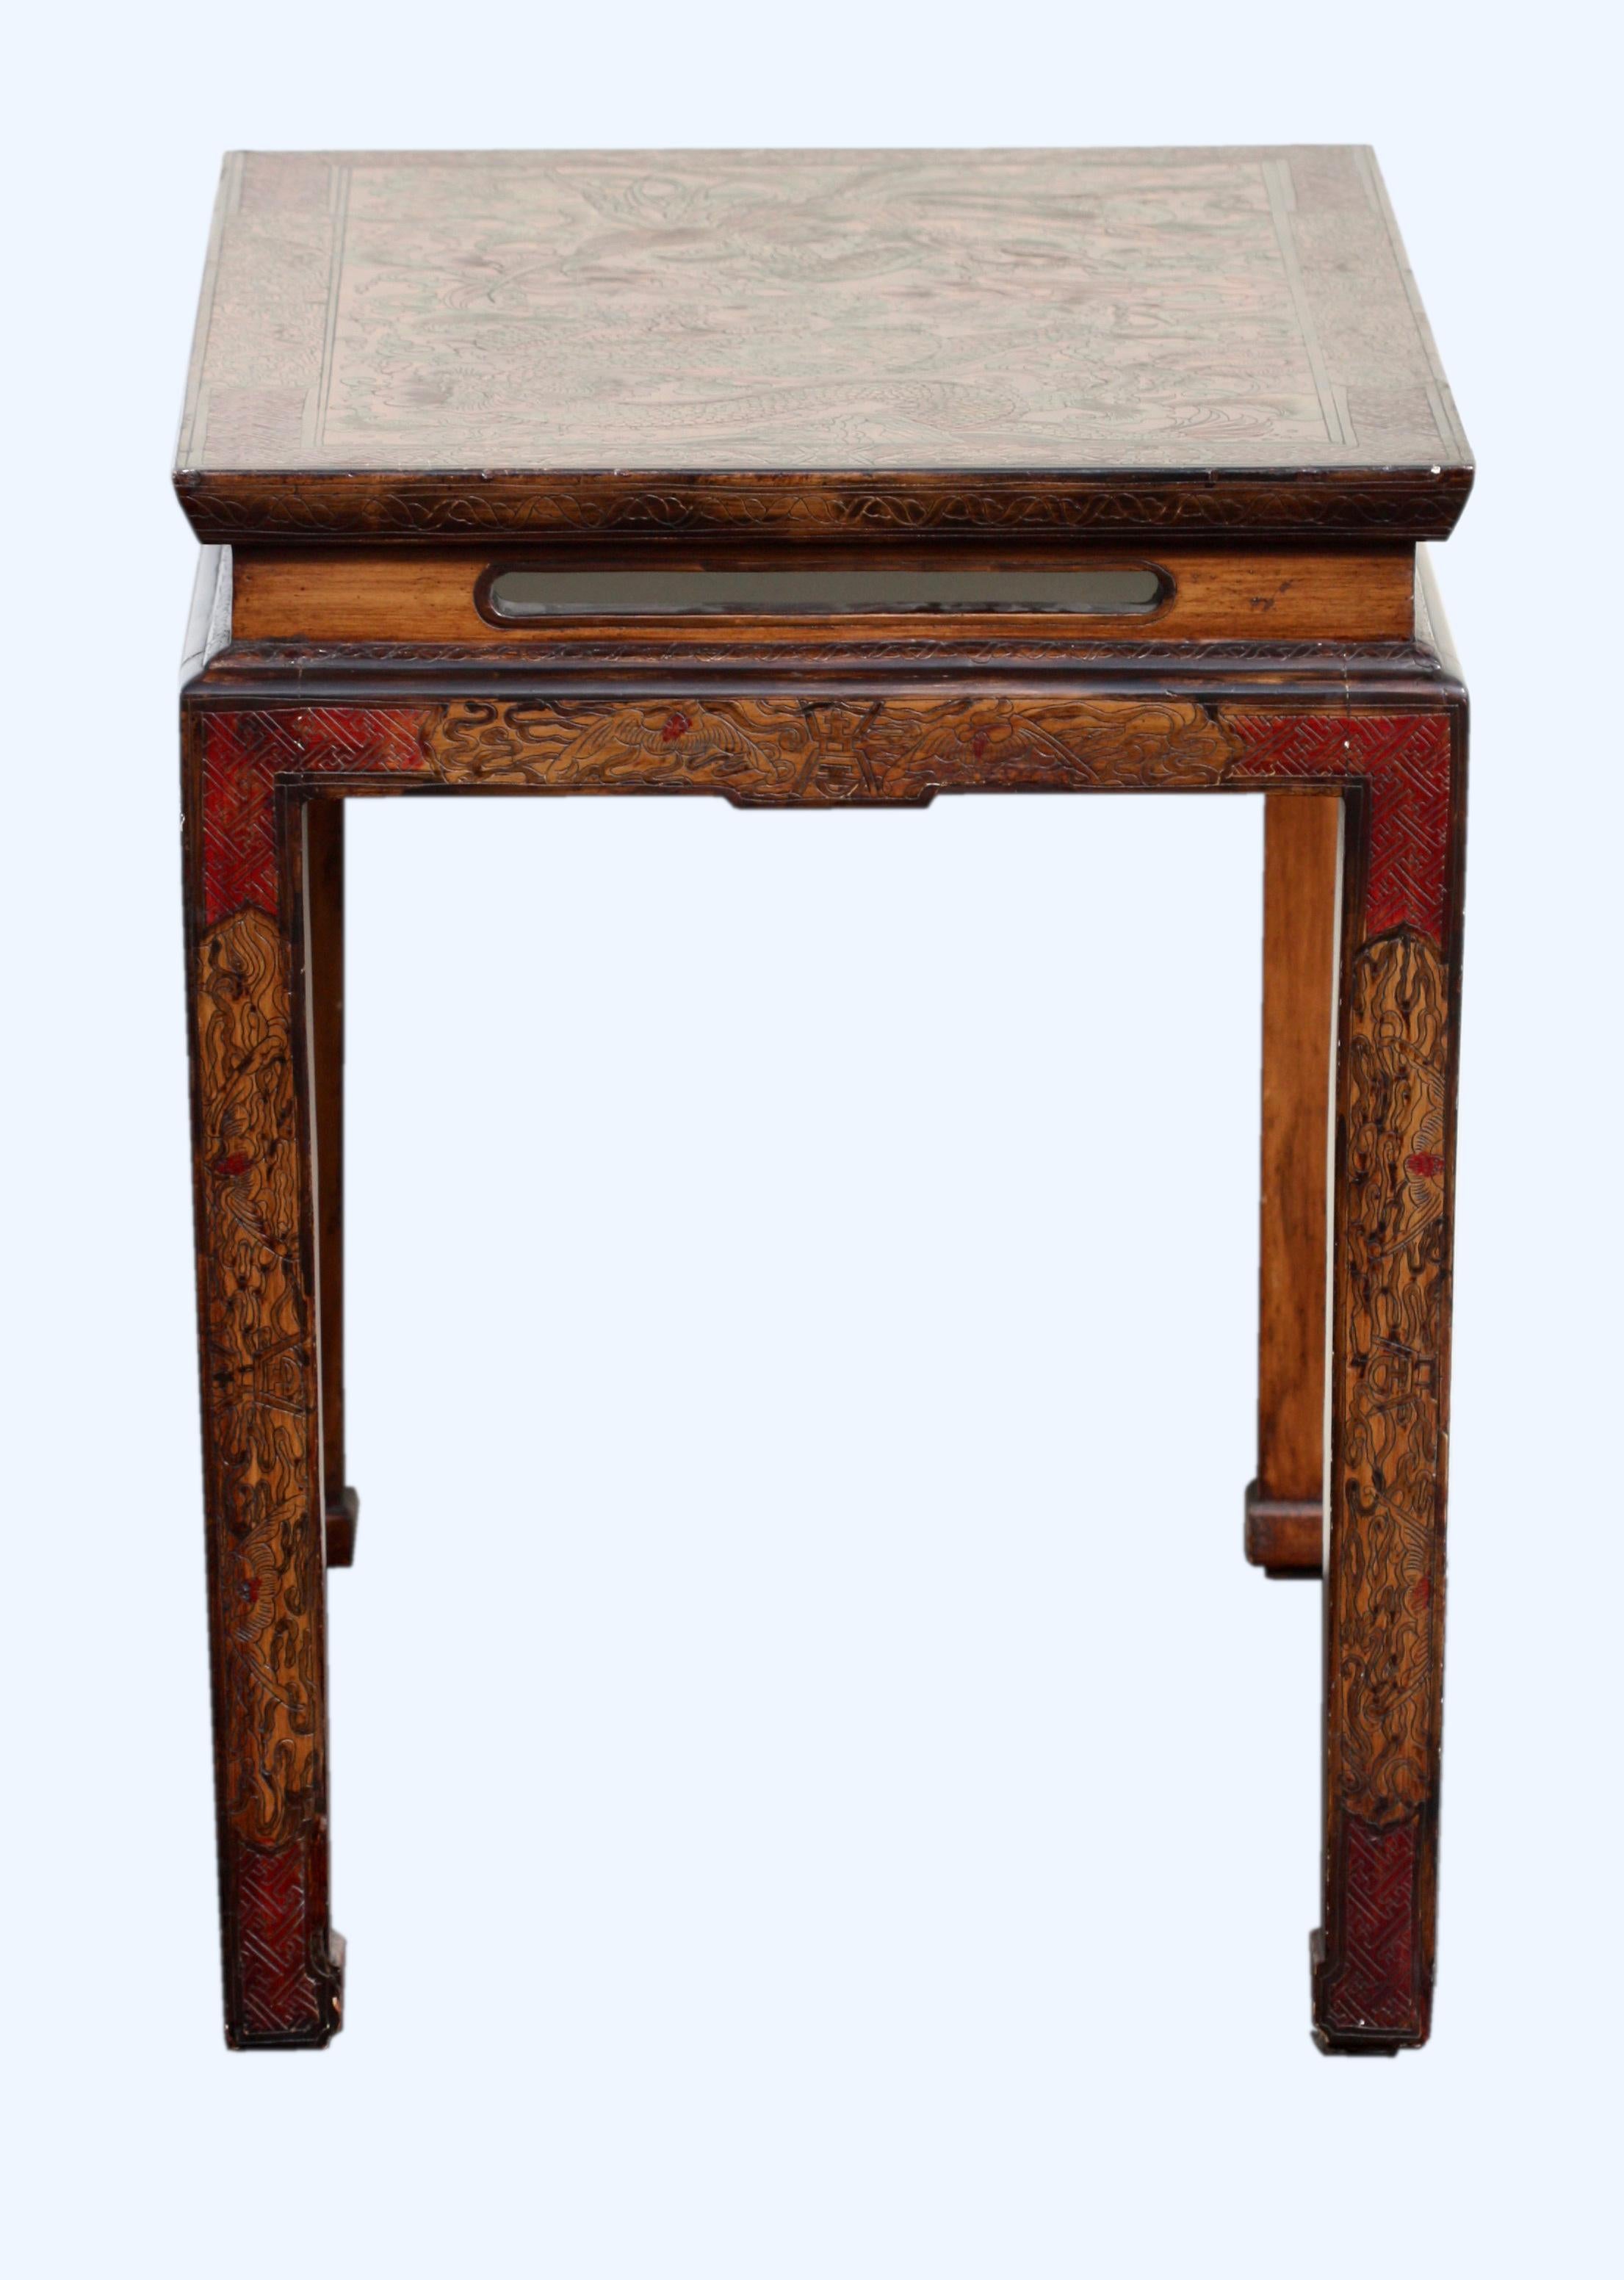 A Huanghuali style table, Chinese, Qing dynasty, 19th century
The rectangular paneled top above a straight waist and apron, the legs of square section 
Measures: Height 25.25 in. (64.13 cm.), width 29.5 in. (74.93 cm.), depth 19.75 in. (50.16